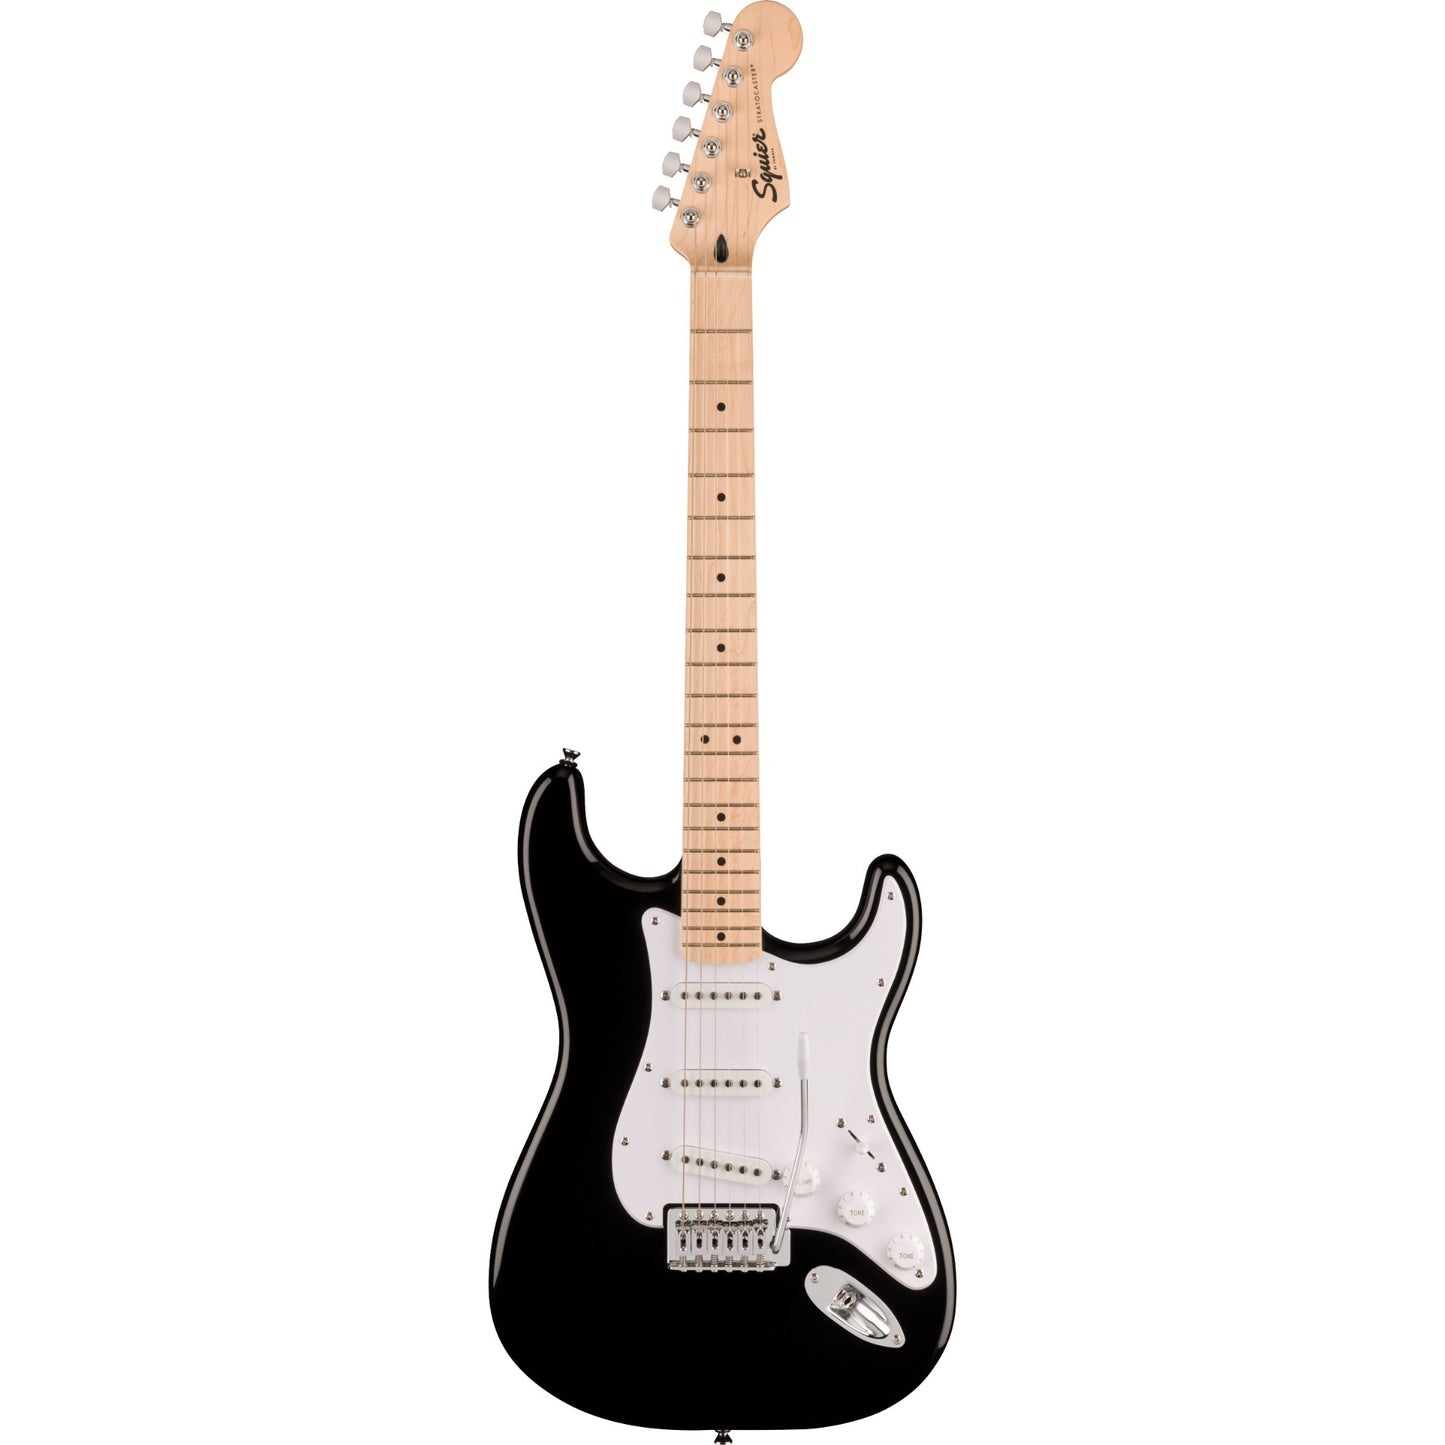 Squier Sonic Stratocaster Electric Guitar in Black